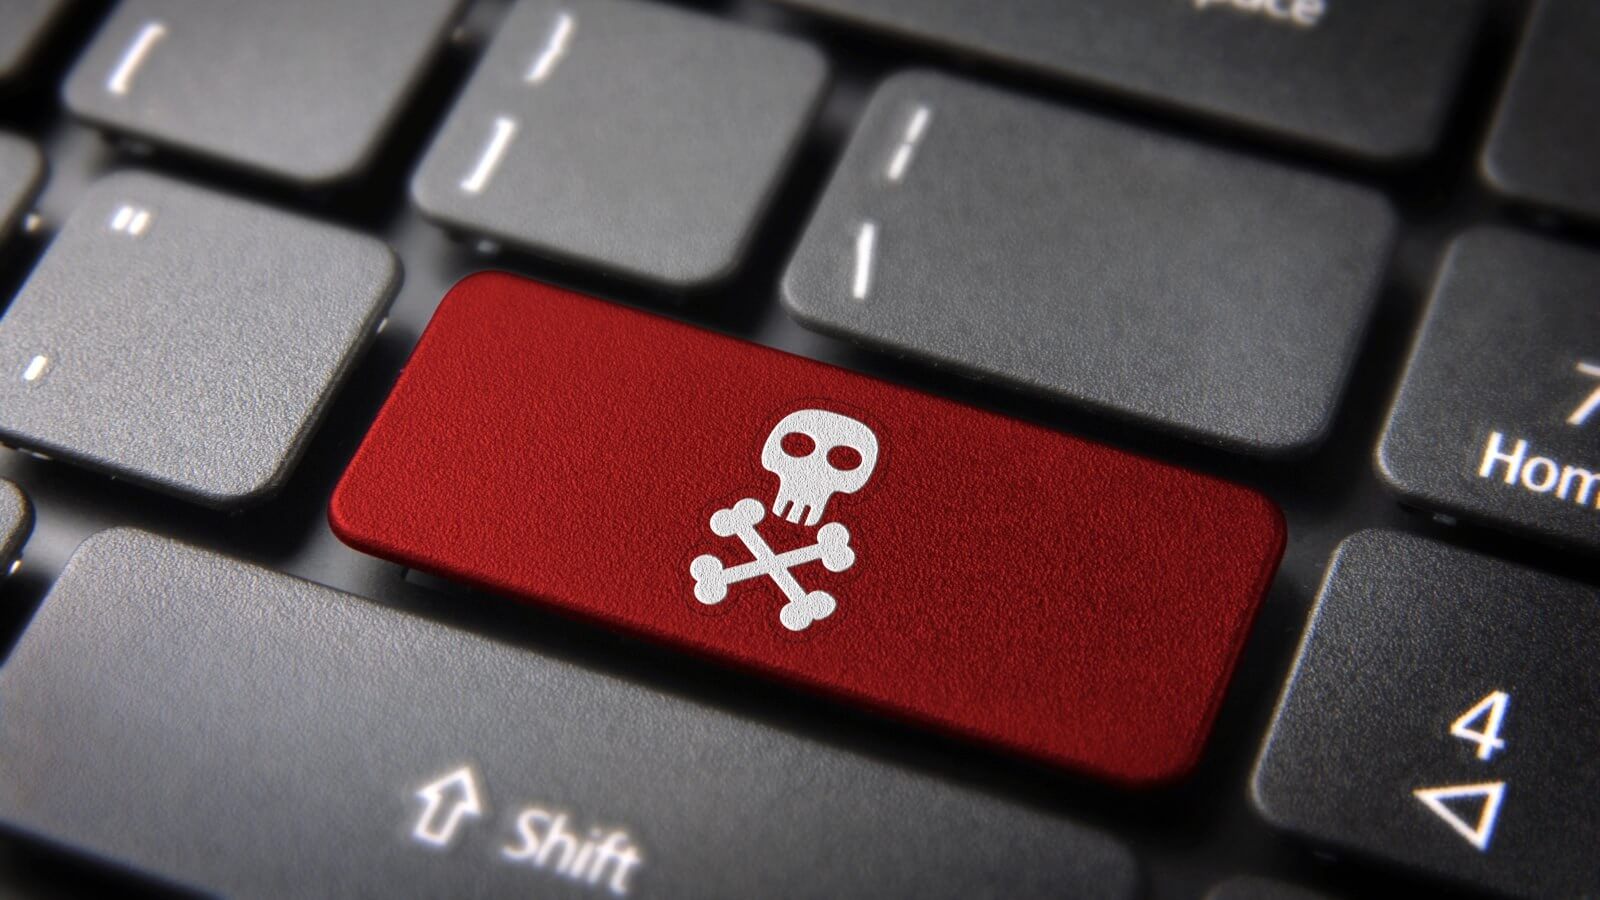 Streaming services are 'killing' piracy, New Zealand study claims